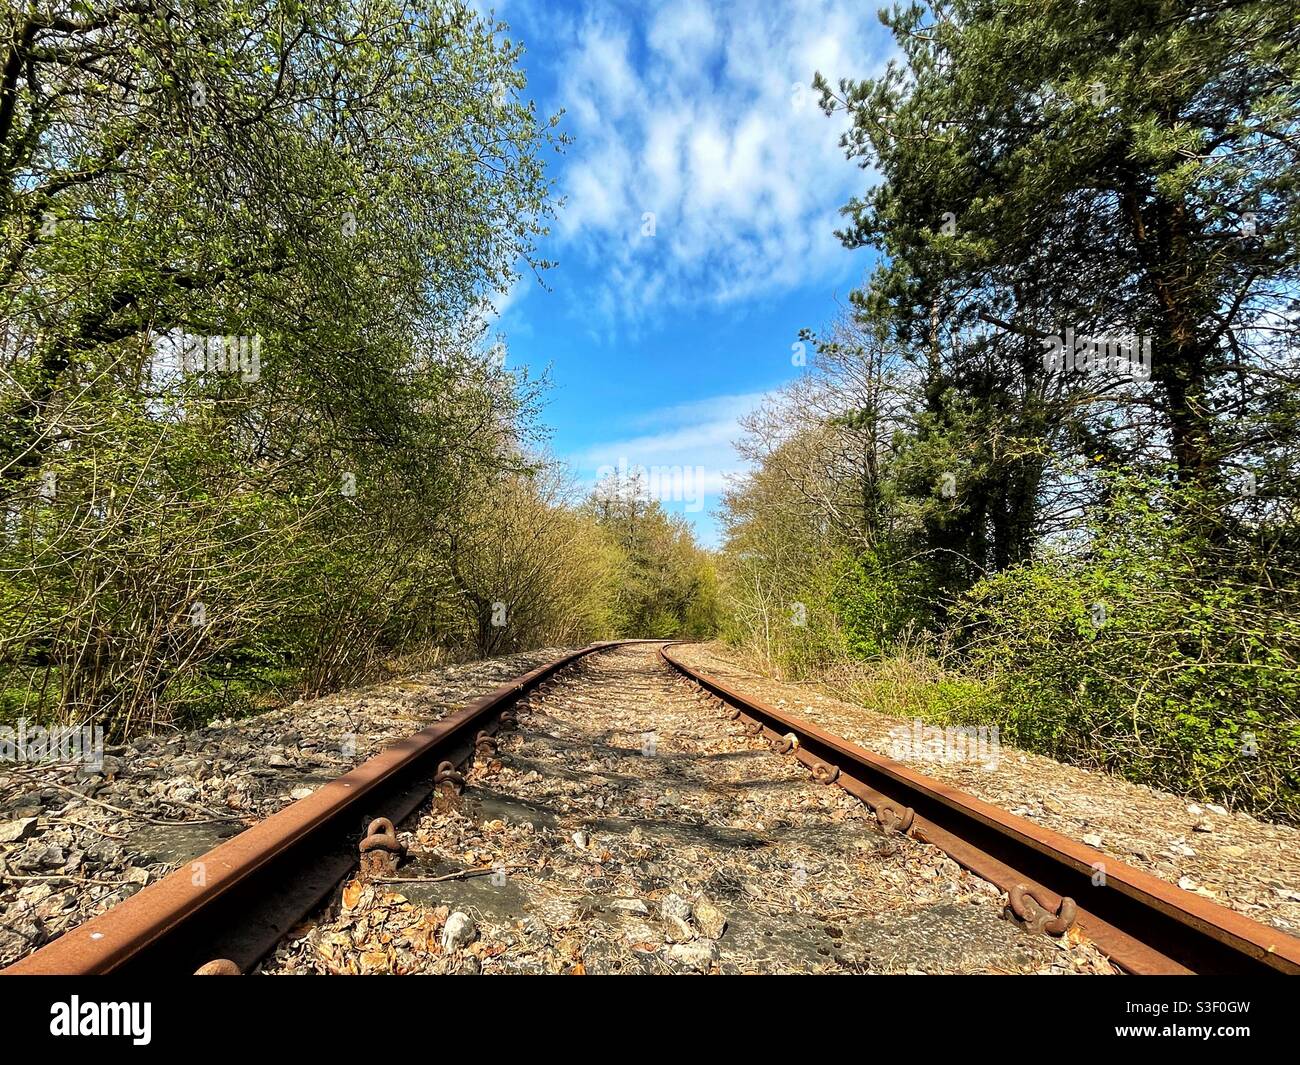 Railway track on a rural branch line Stock Photo